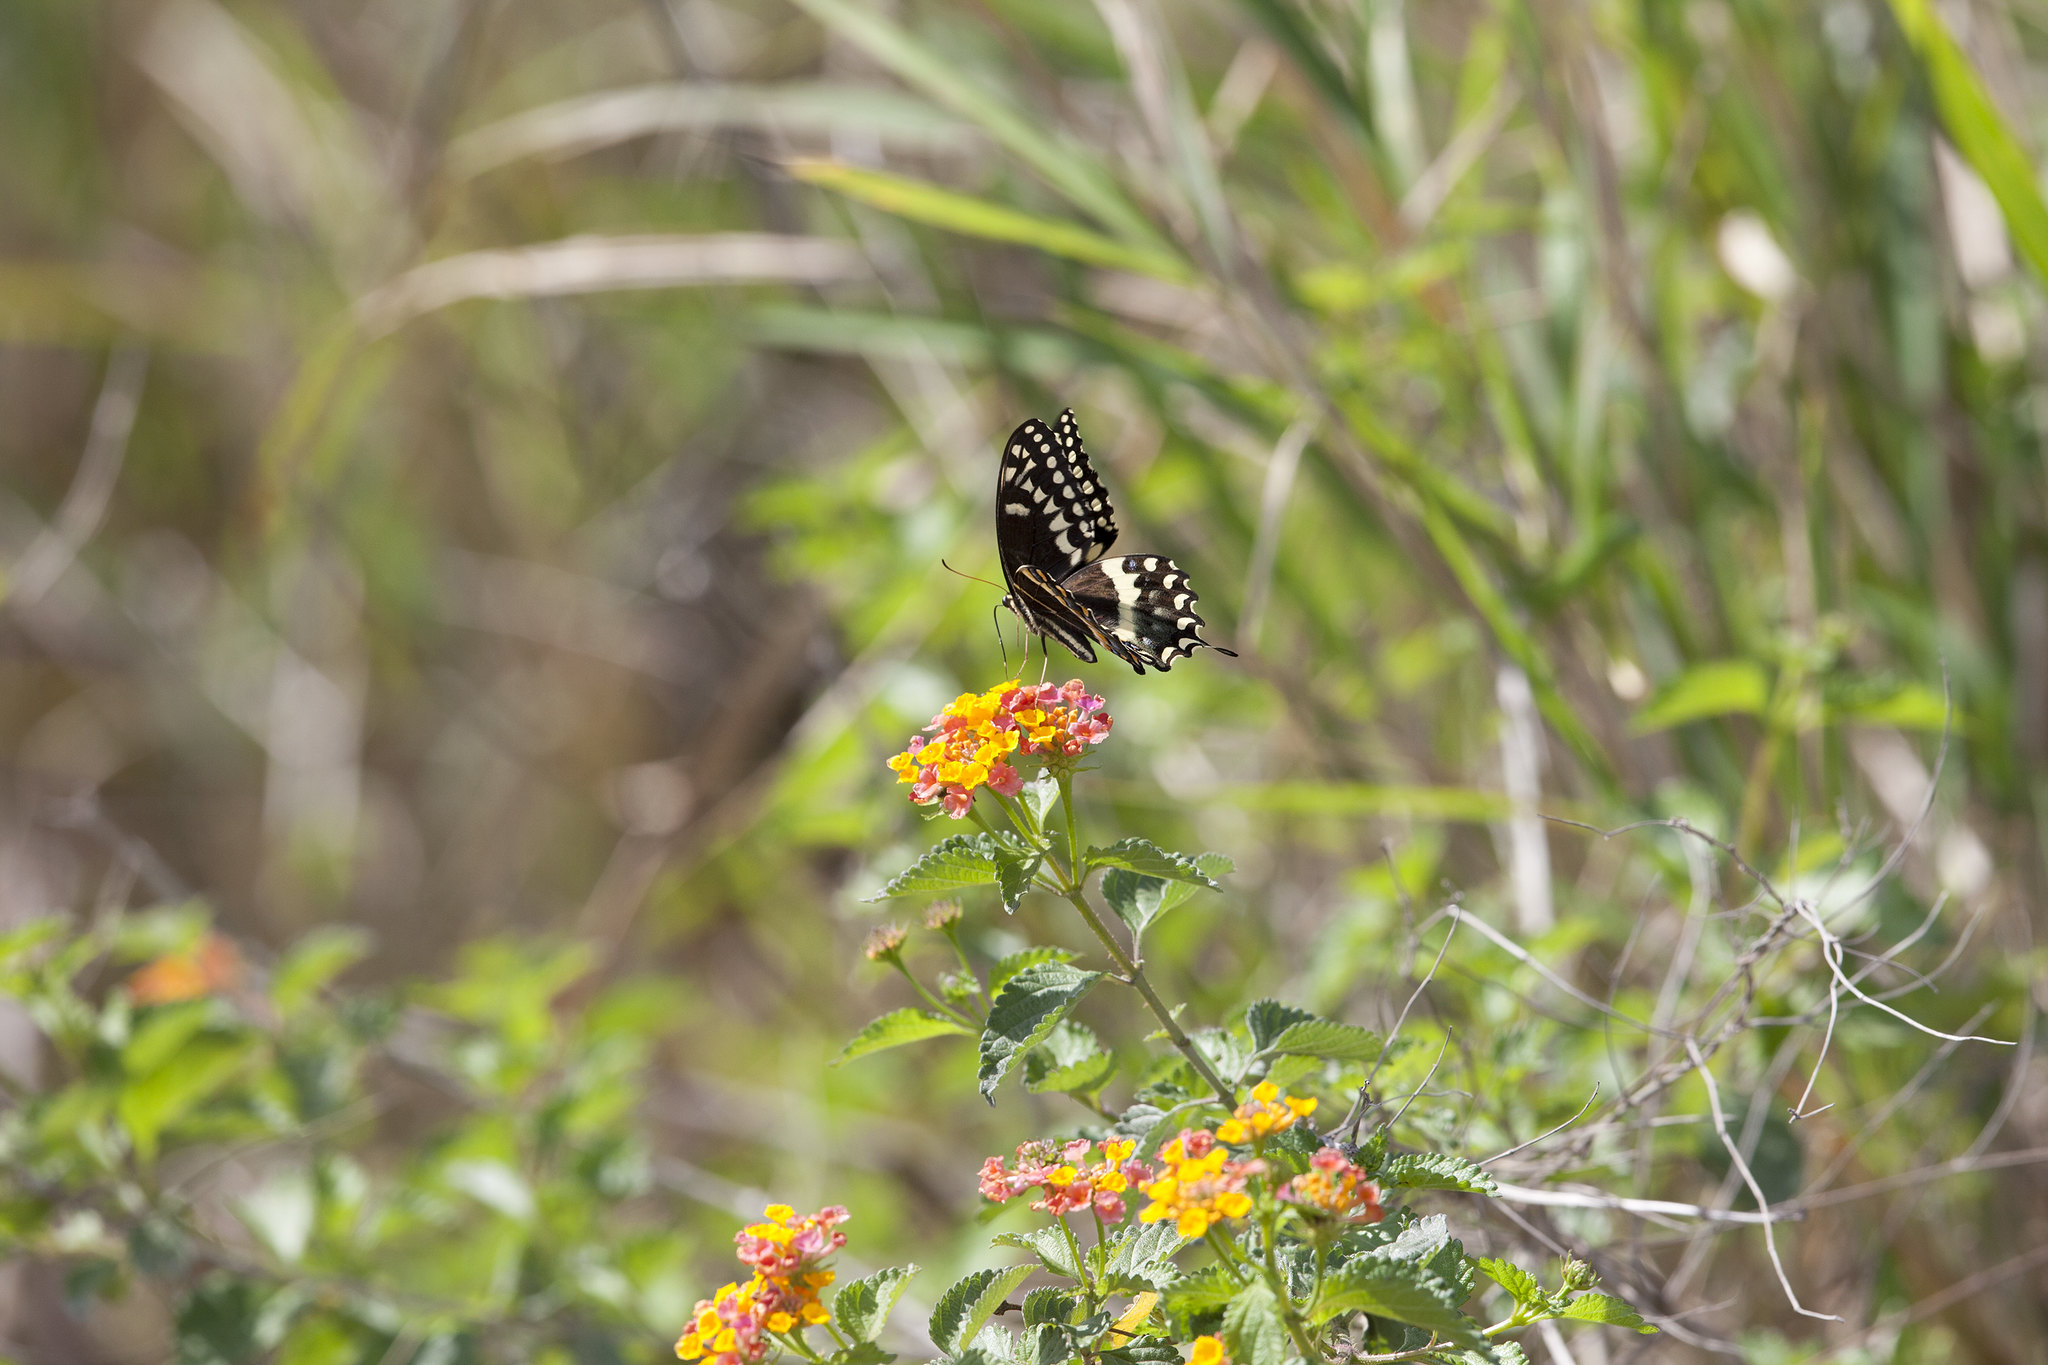 A black swallowtail butterfly enjoys a snack from a blooming lantana plant at Merritt Island National Wildlife Refuge in Florida.